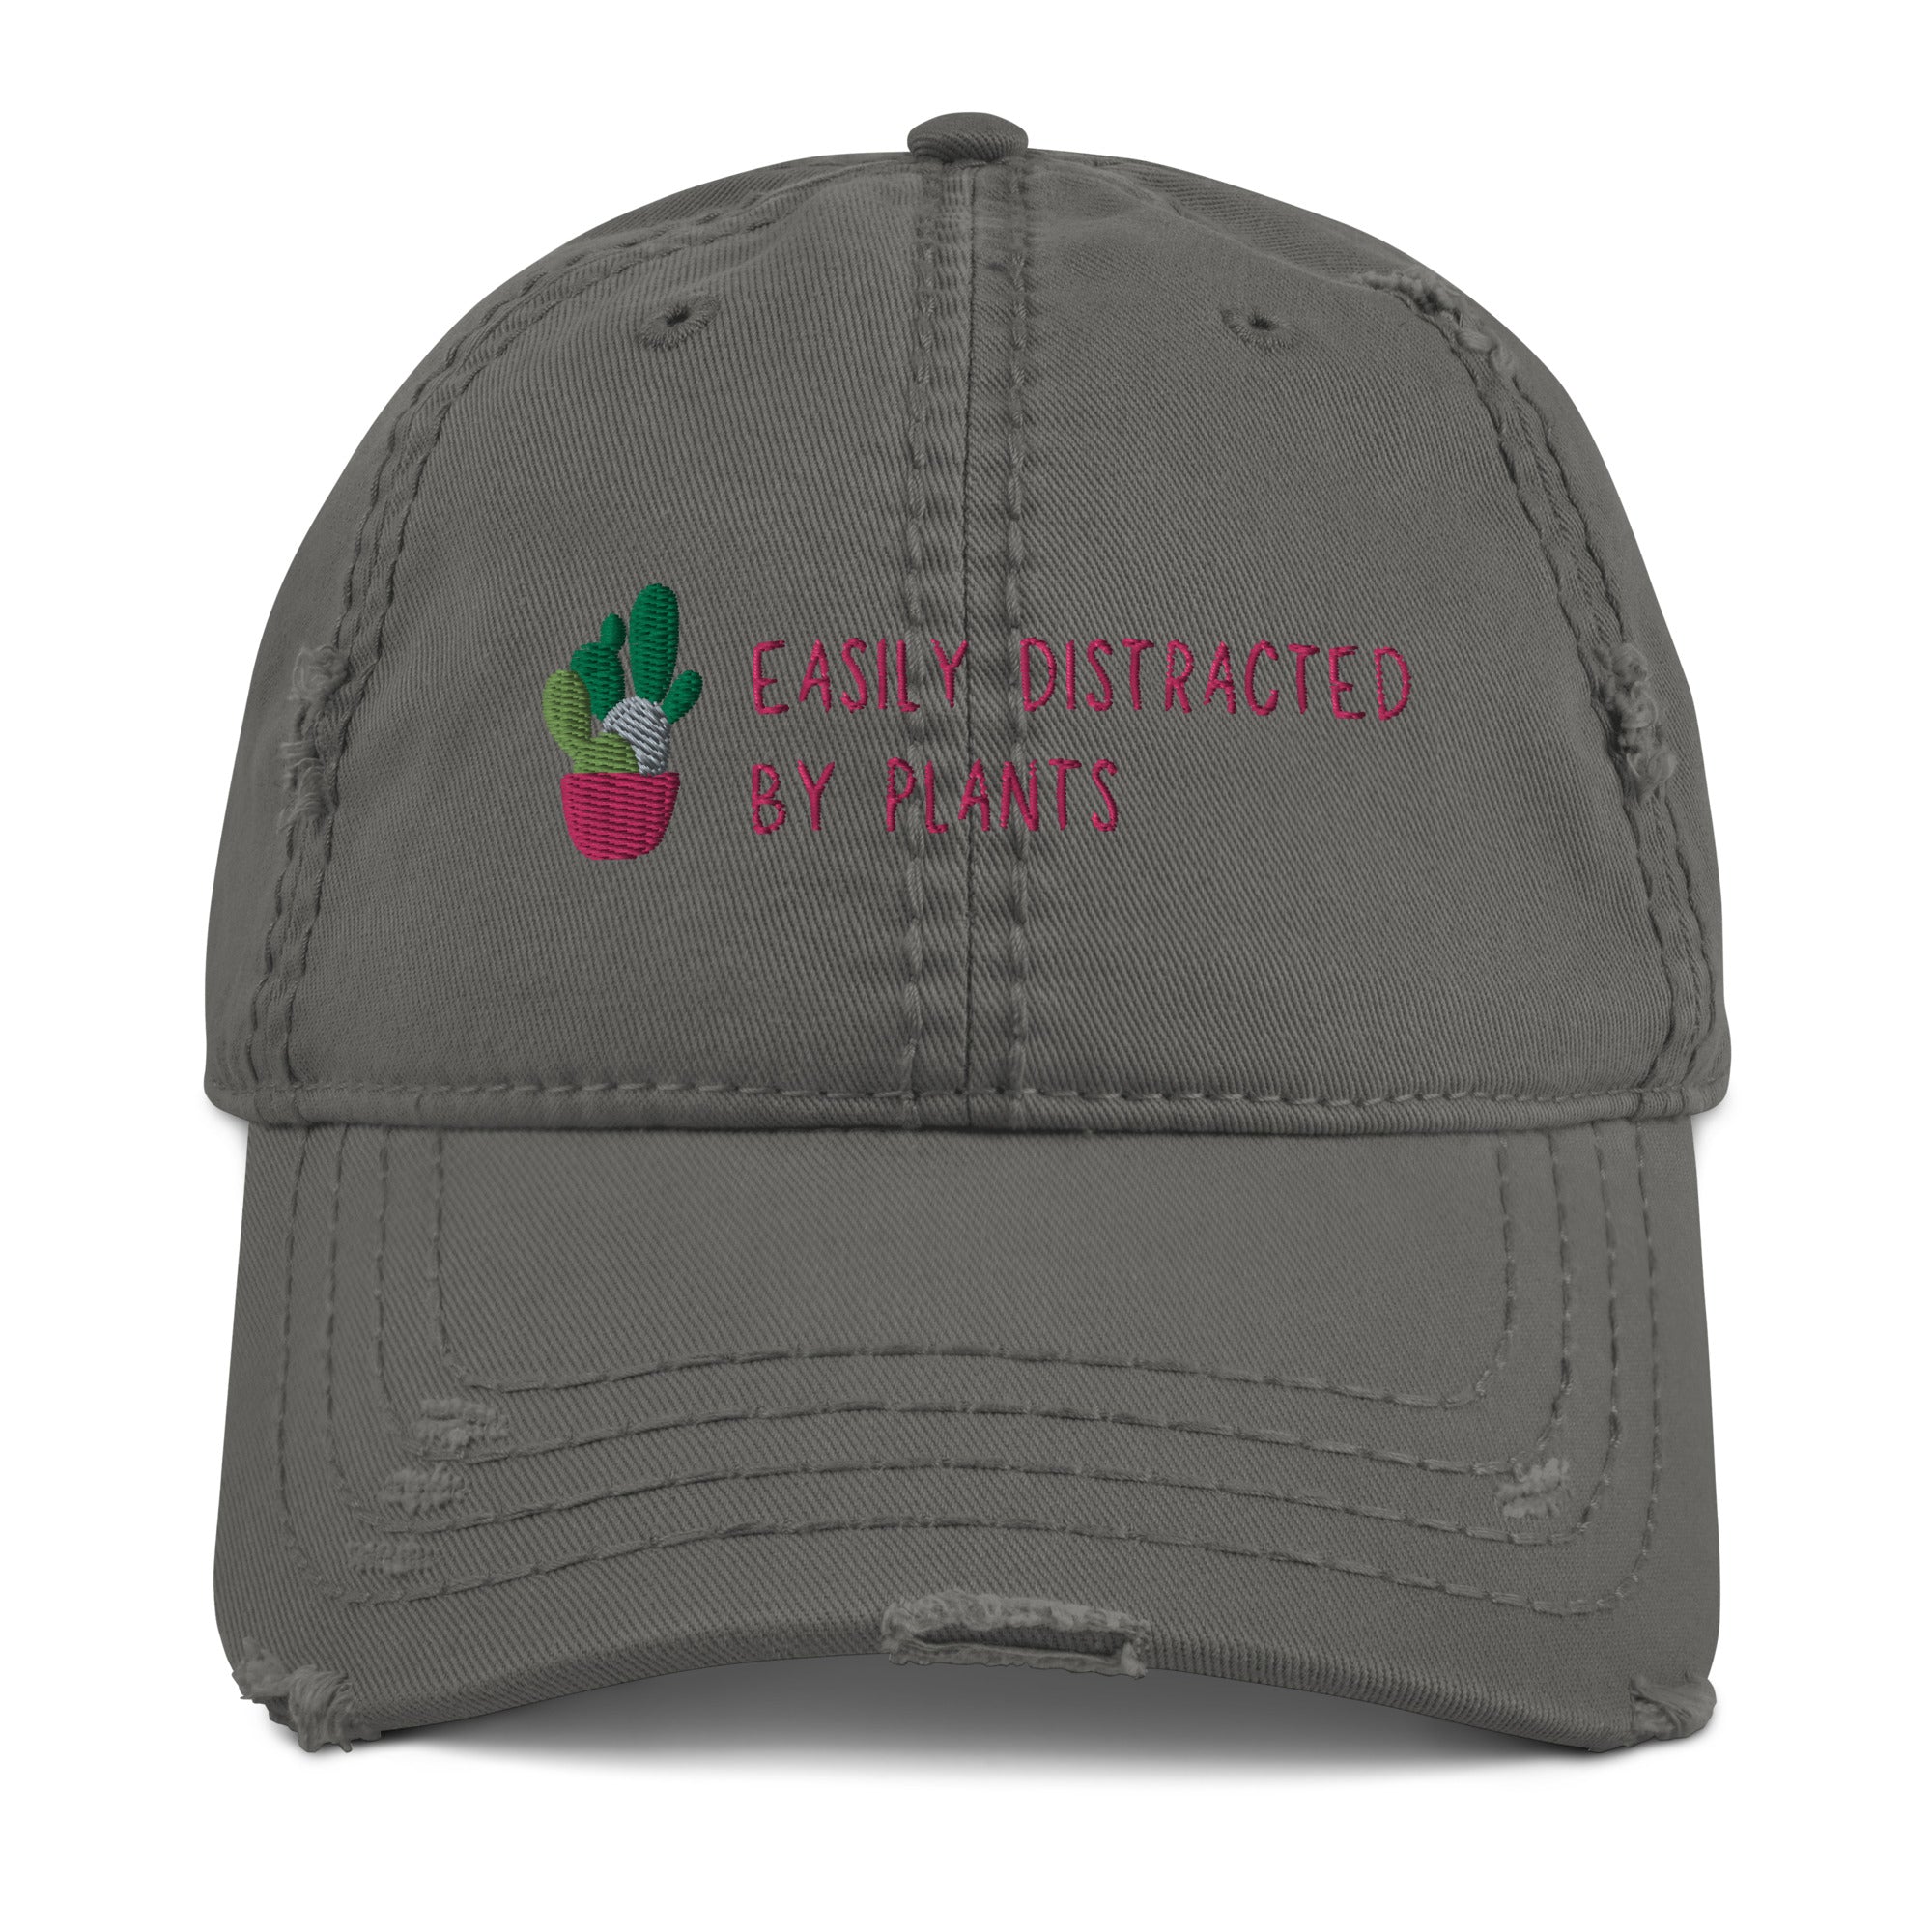 Plant Distraction Distressed Dad Hat Light